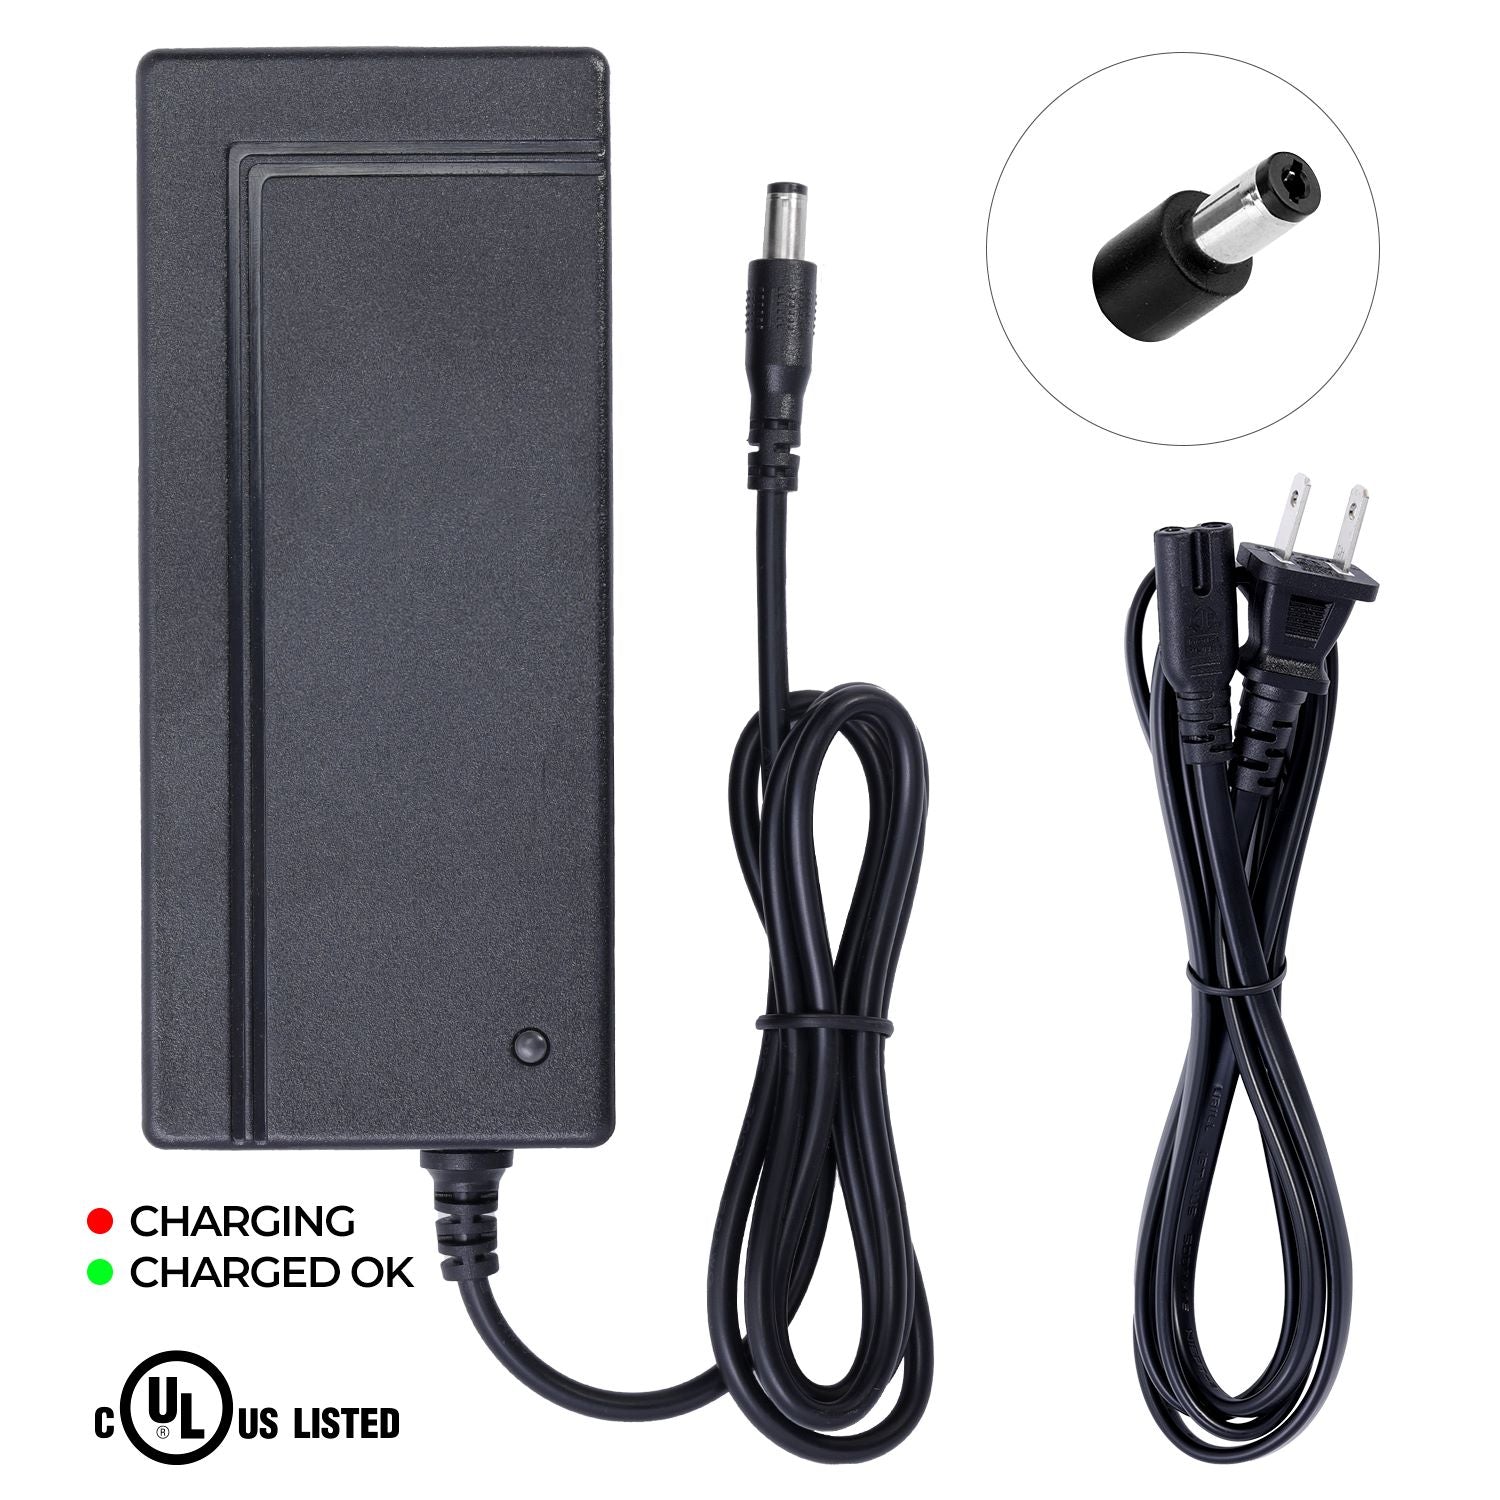 Charger for Evercross EV10K Pro Electric Scooter